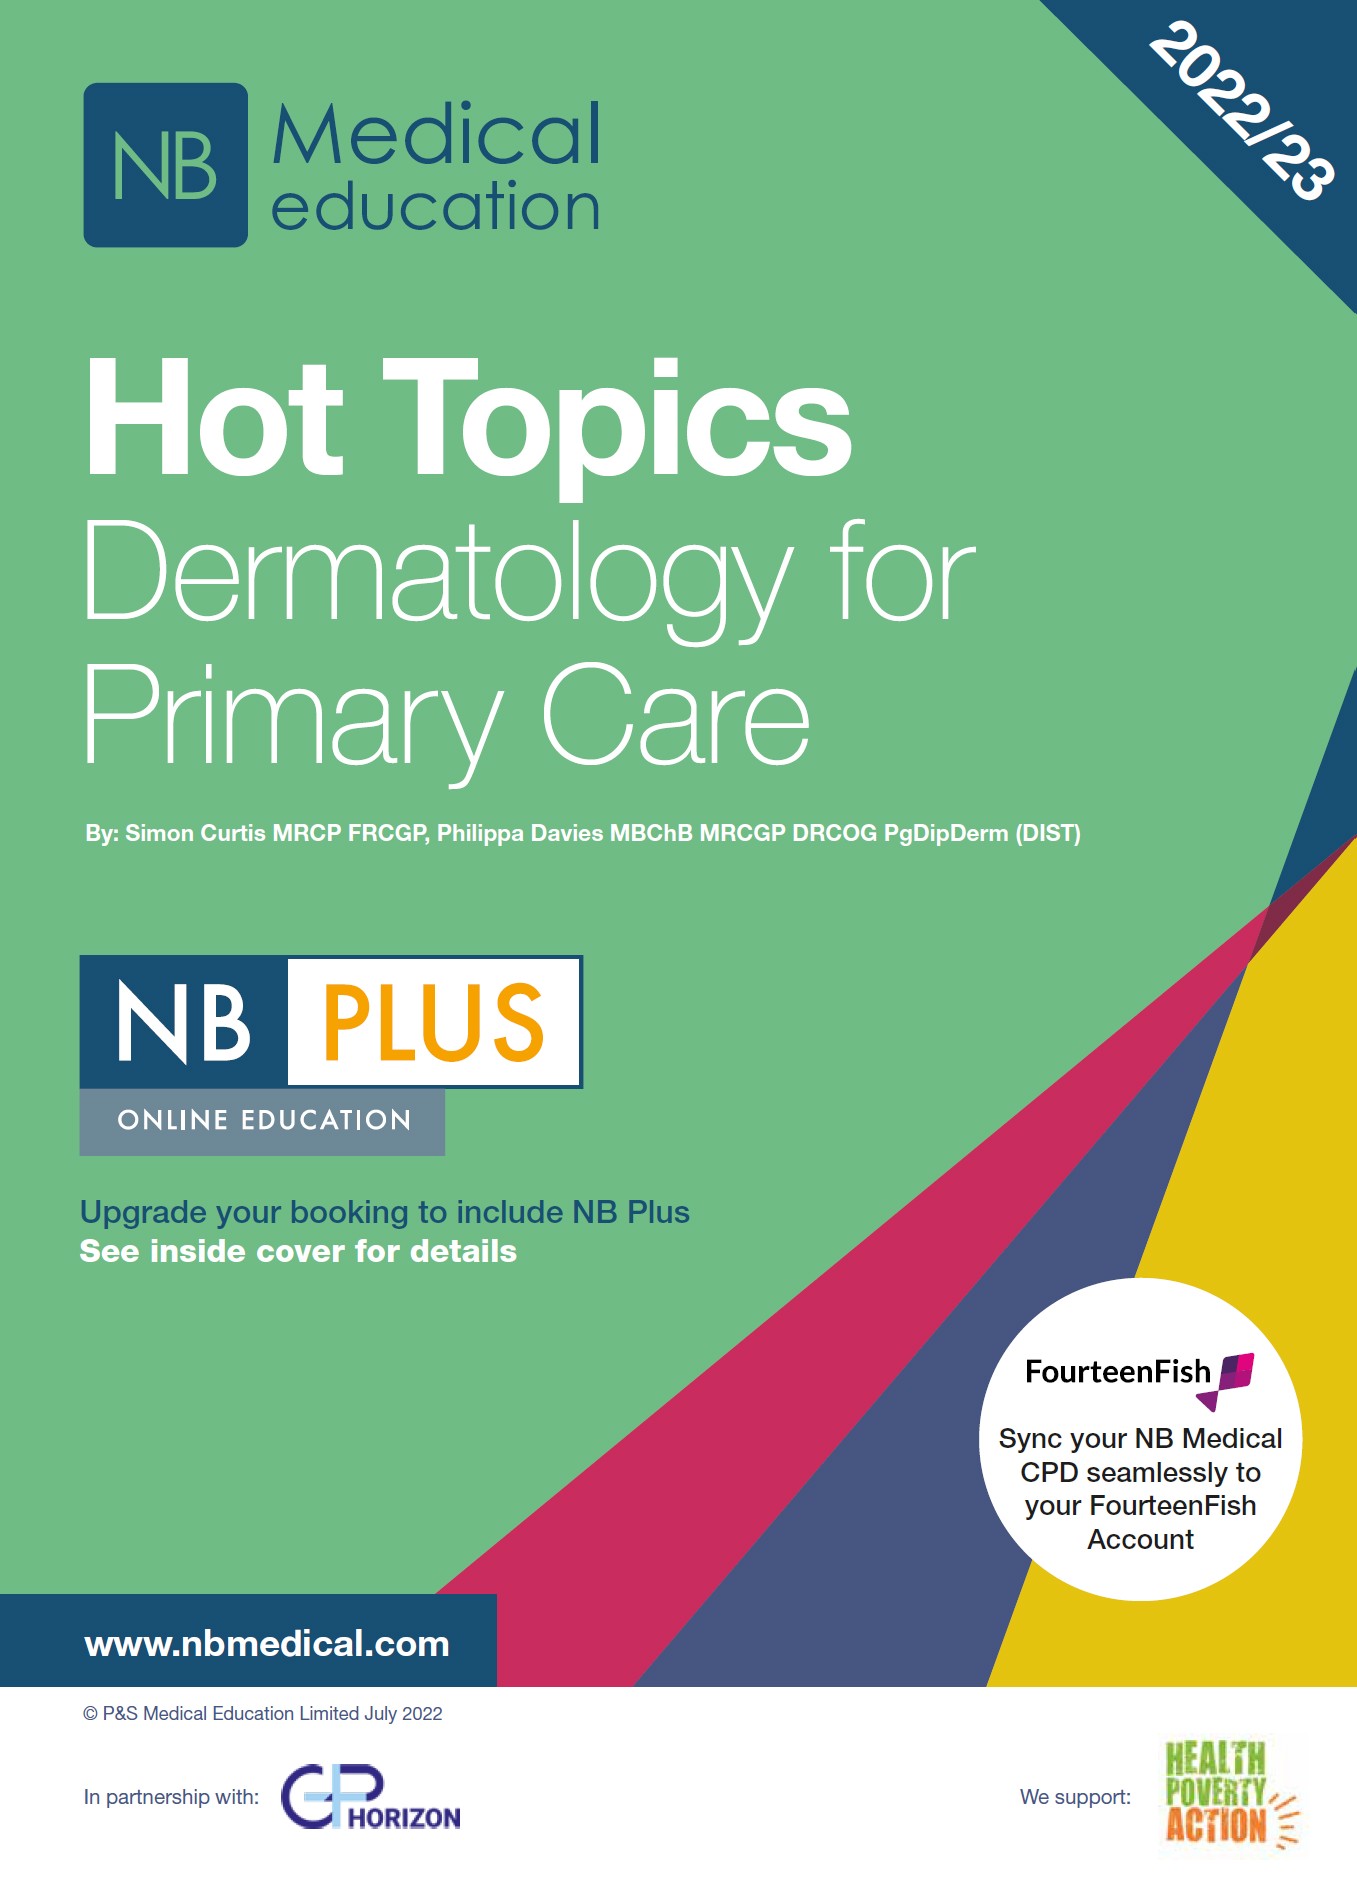 Hot Topics Dermatology in Primary Care Booklet